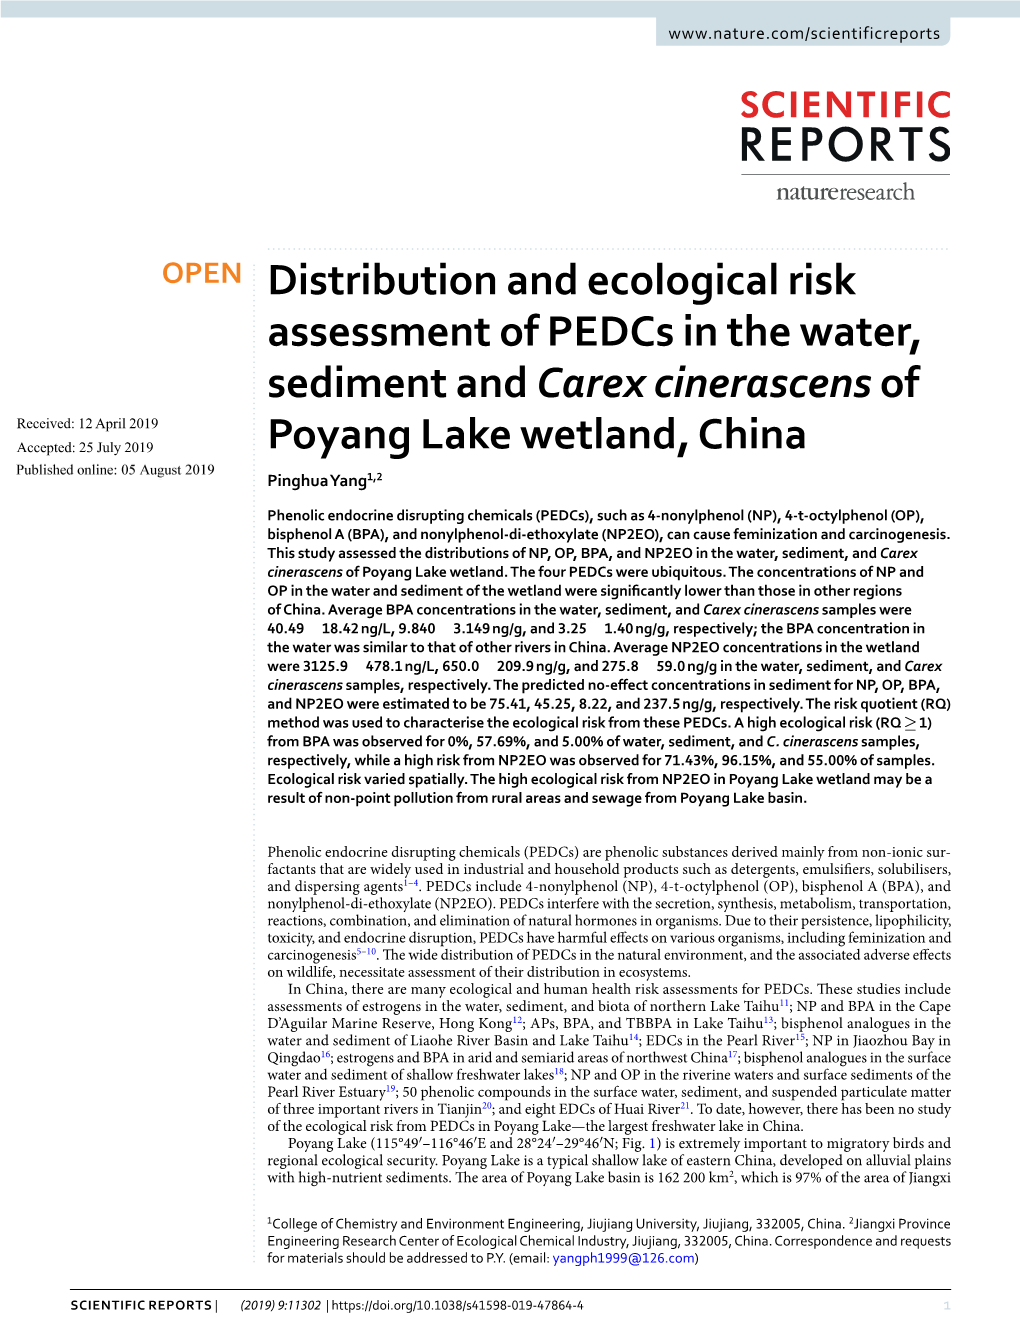 Distribution and Ecological Risk Assessment of Pedcs in the Water